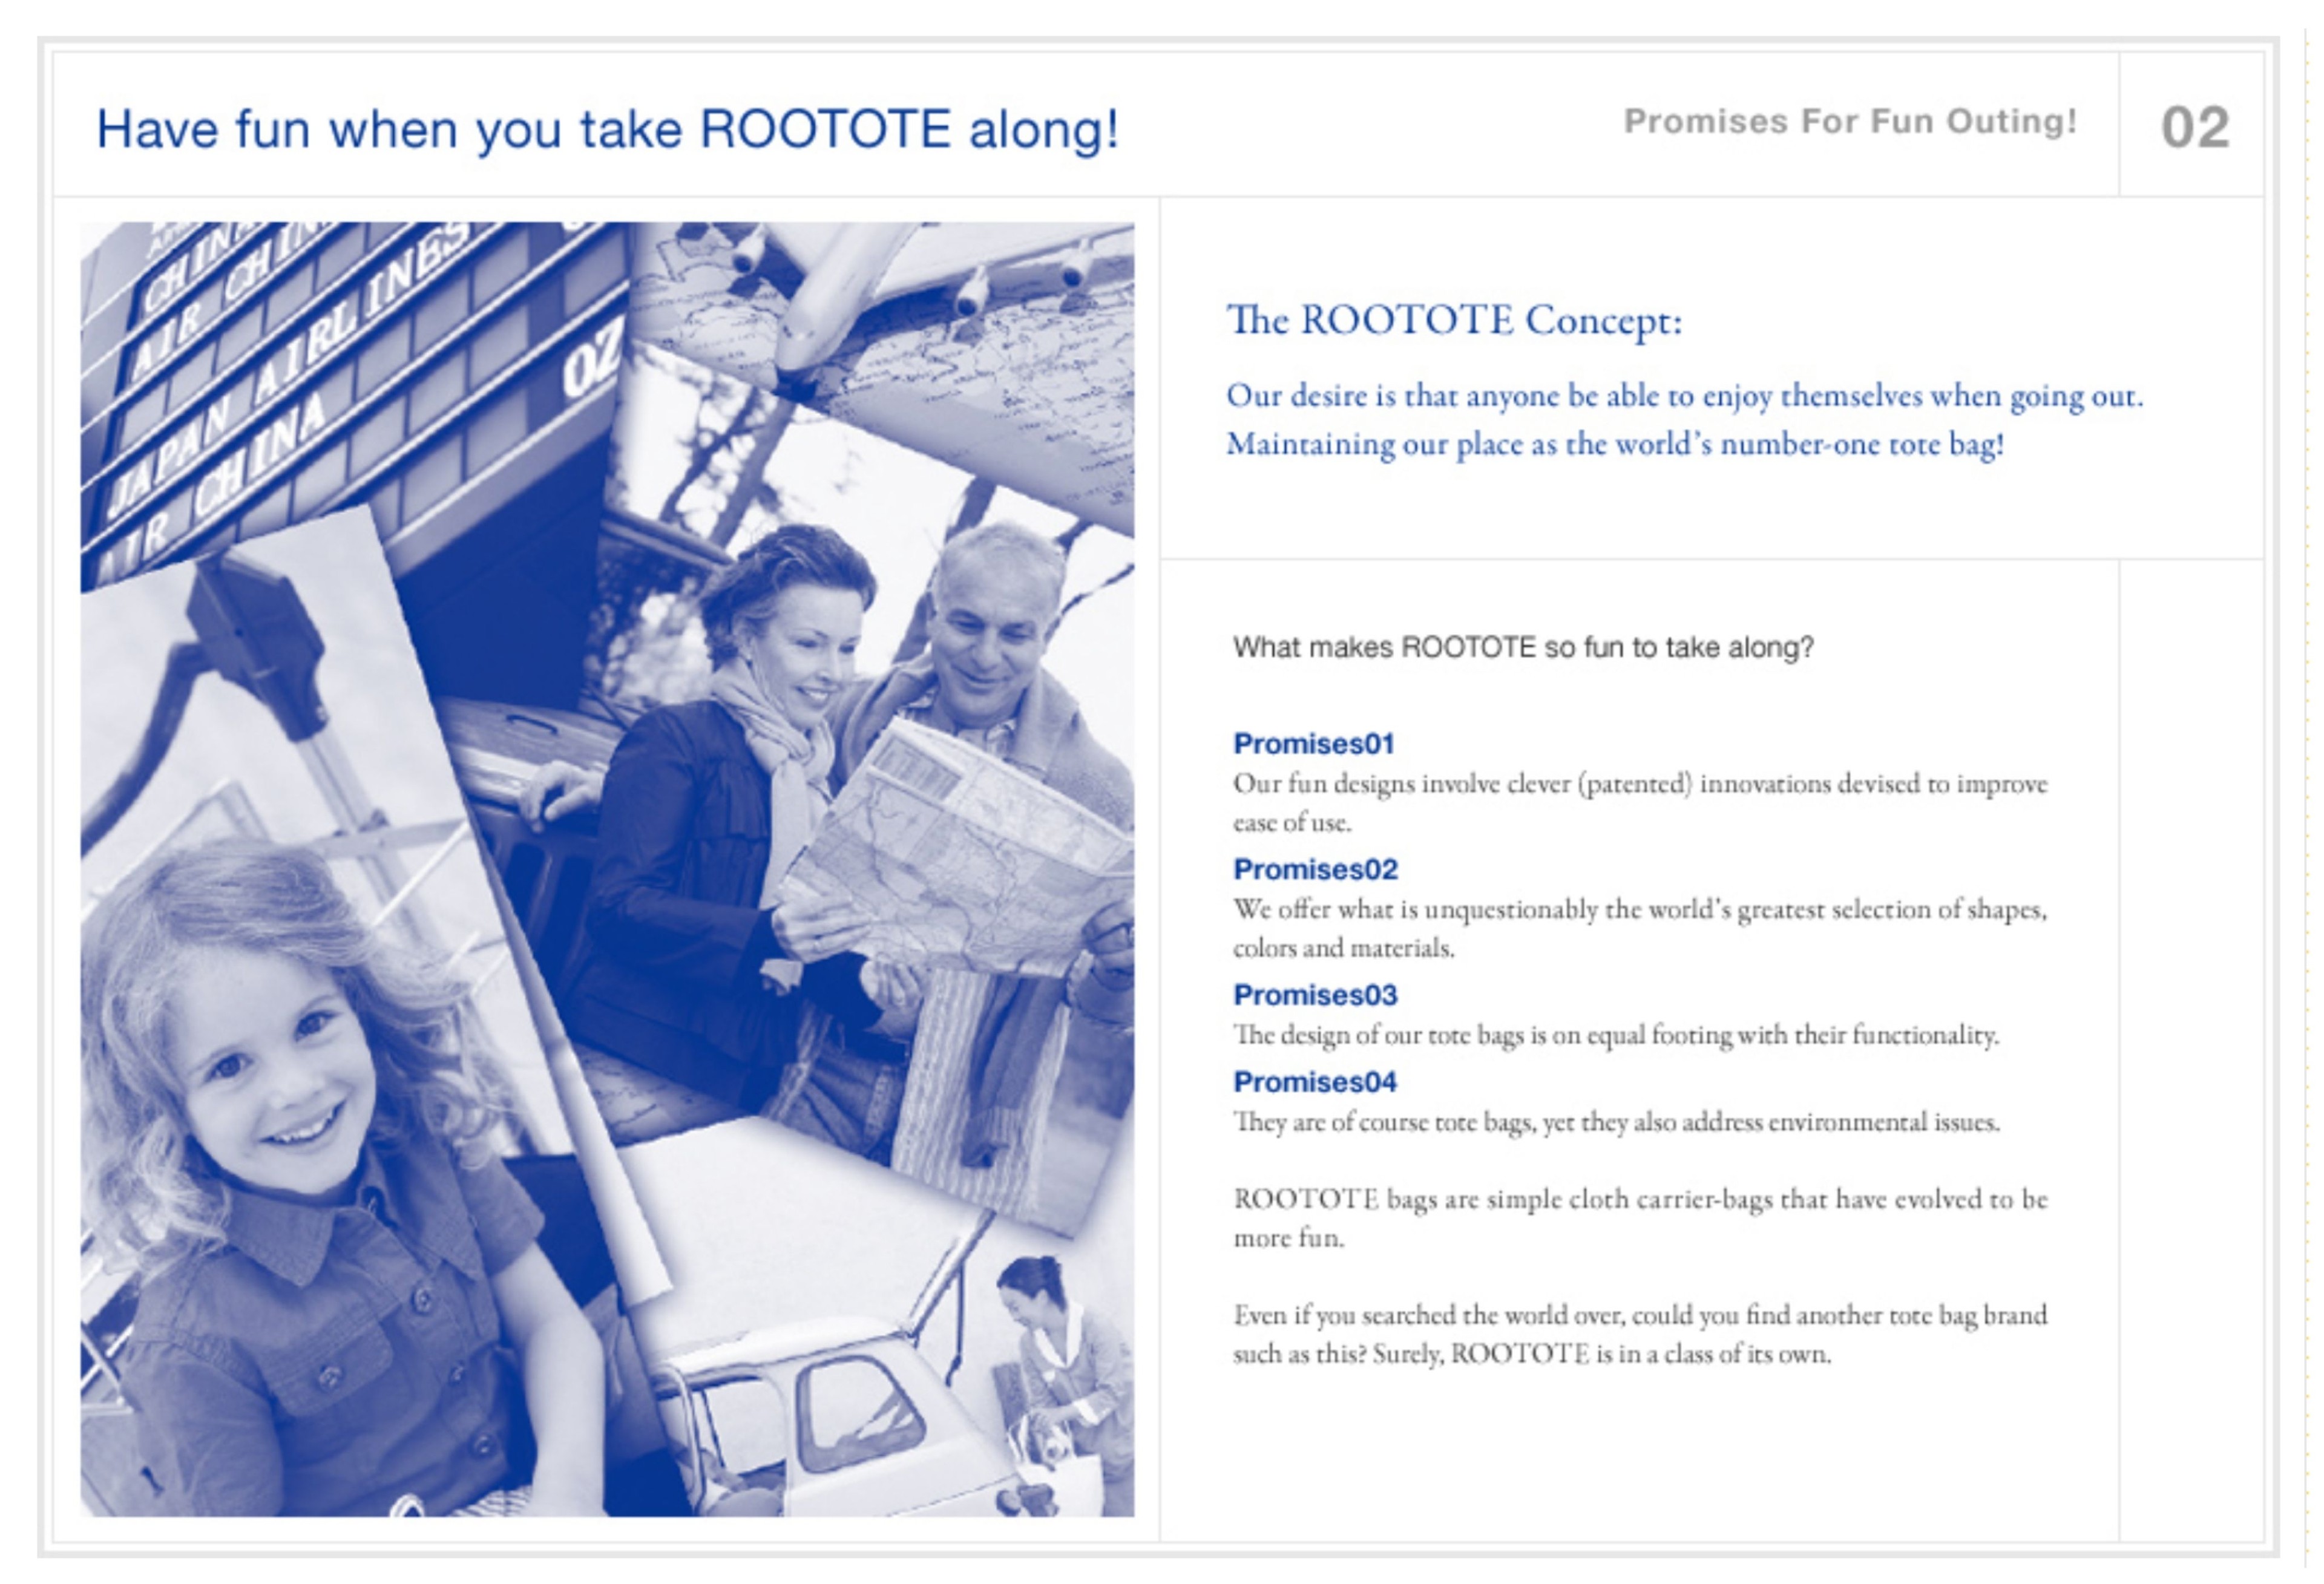 The ROOTOTE Concept